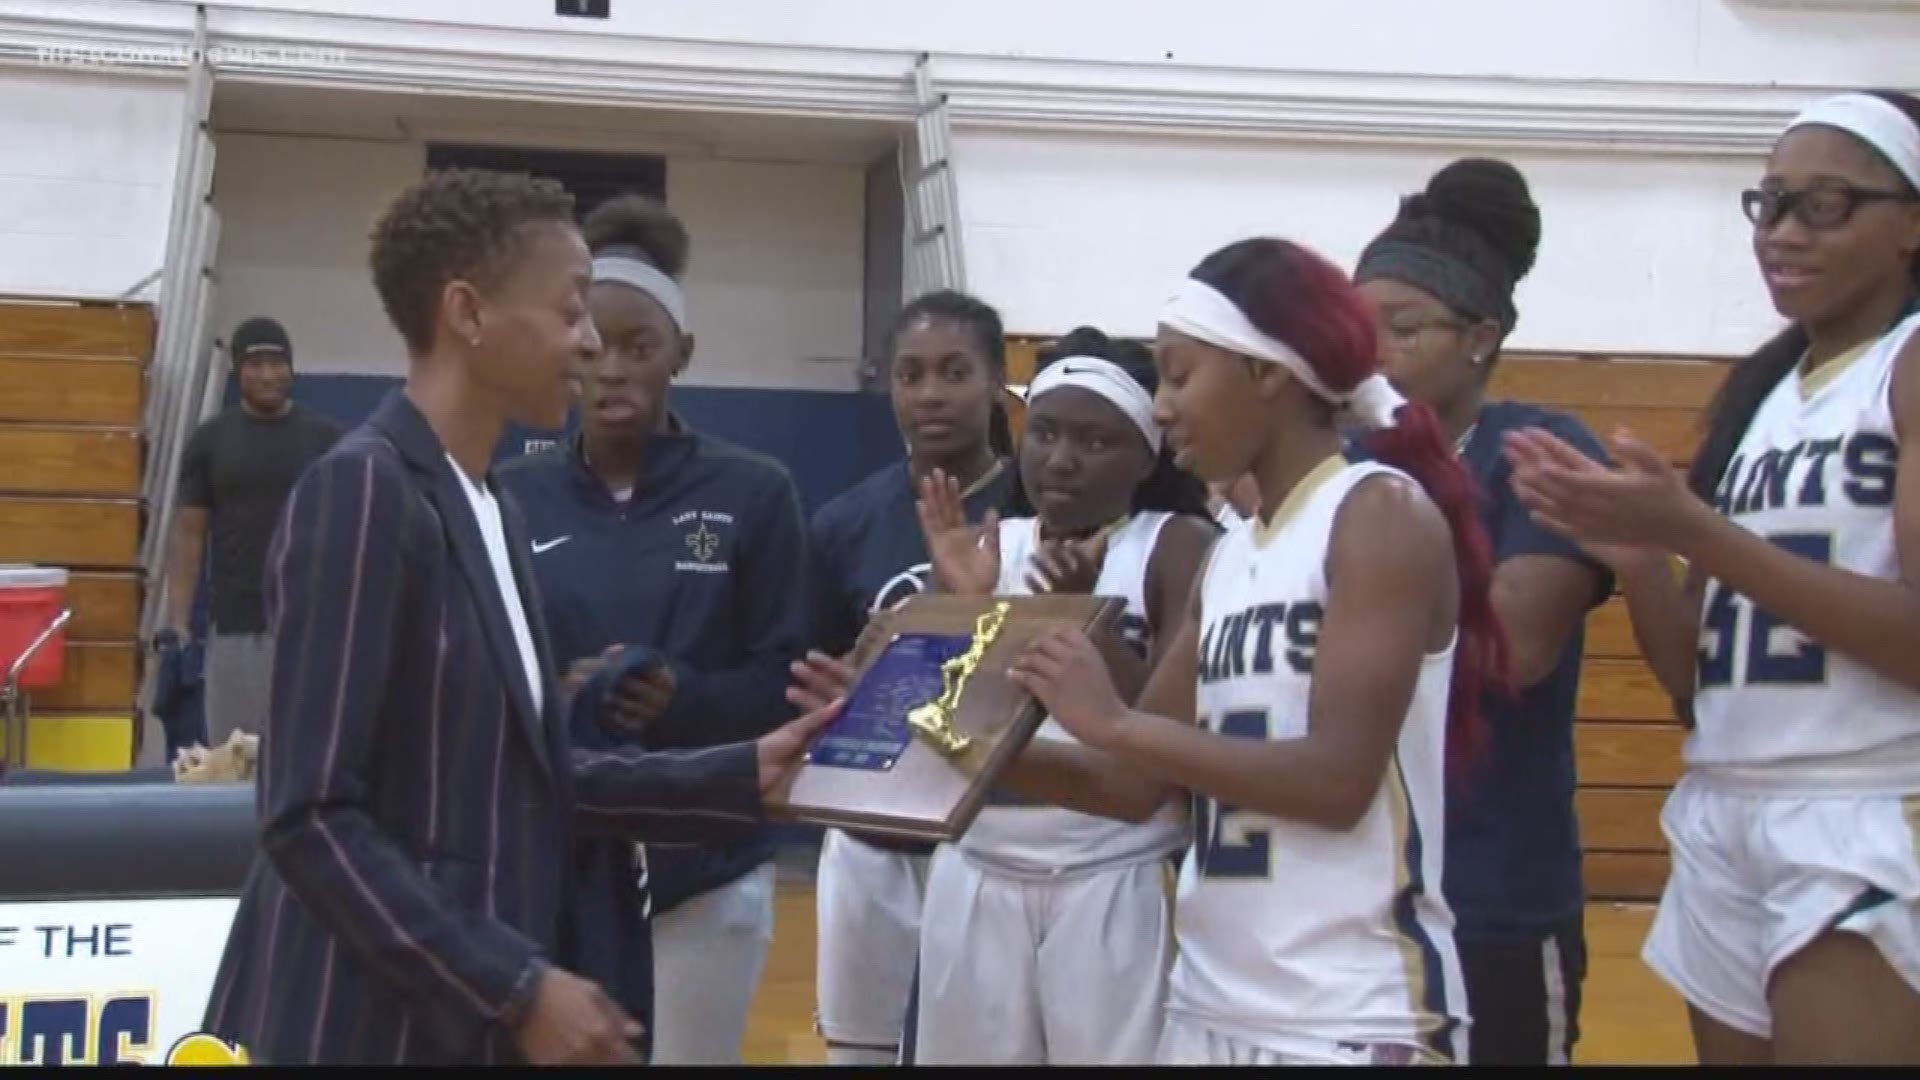 Sandalwood's lone senior led the Saints to their second Gateway Conference title earlier this month.